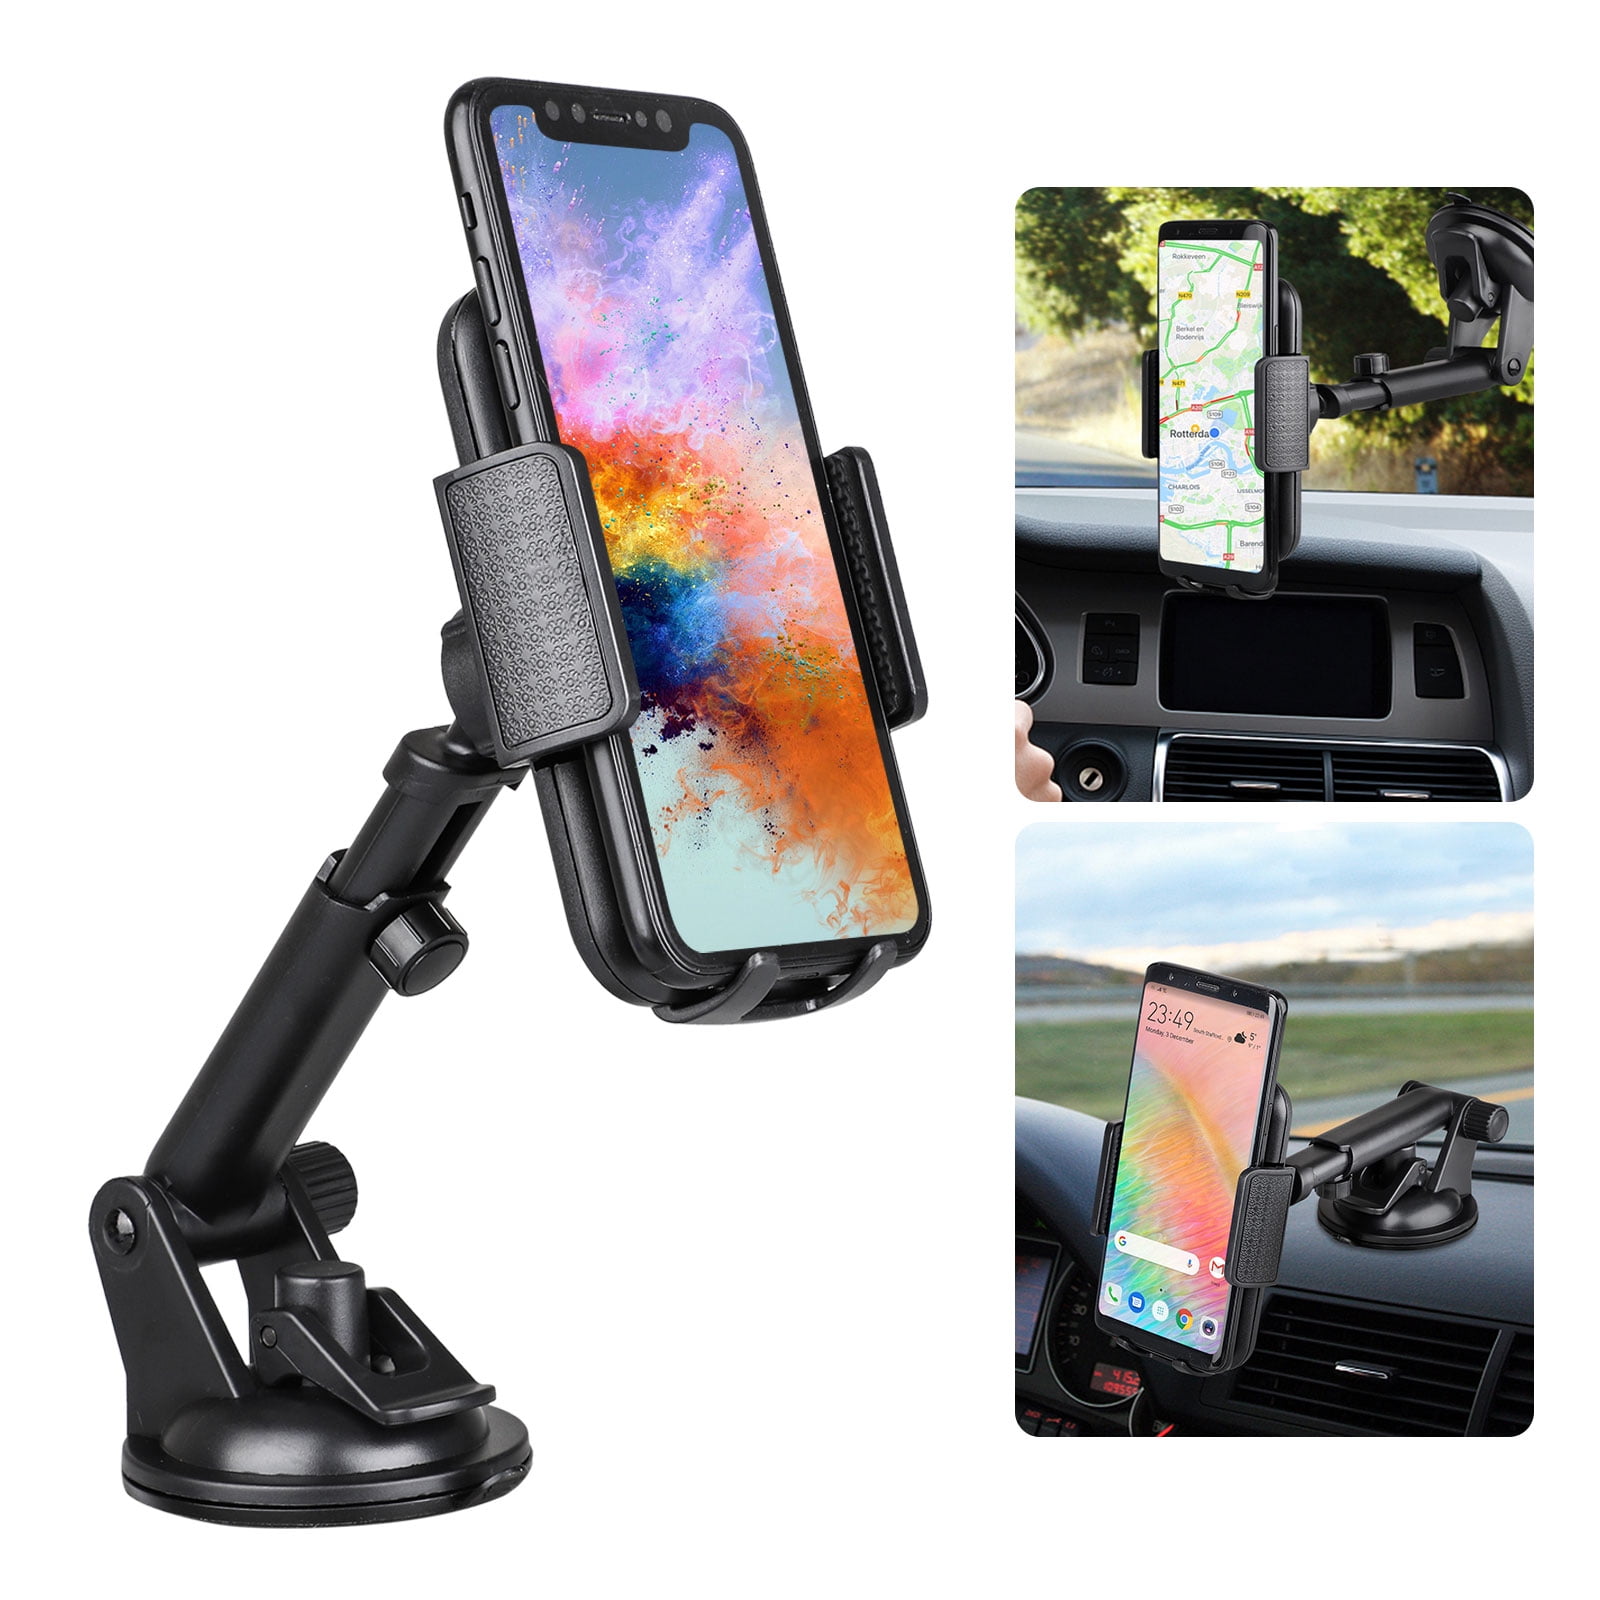 Car Phone Mount with a Super Strong Magnet Black Magnetic Phone Holder for Car Dashboard Compatible with iPhone Xs Max XR X 8 7 Plus Galaxy S9 S8 Plus Note 9 8 and More